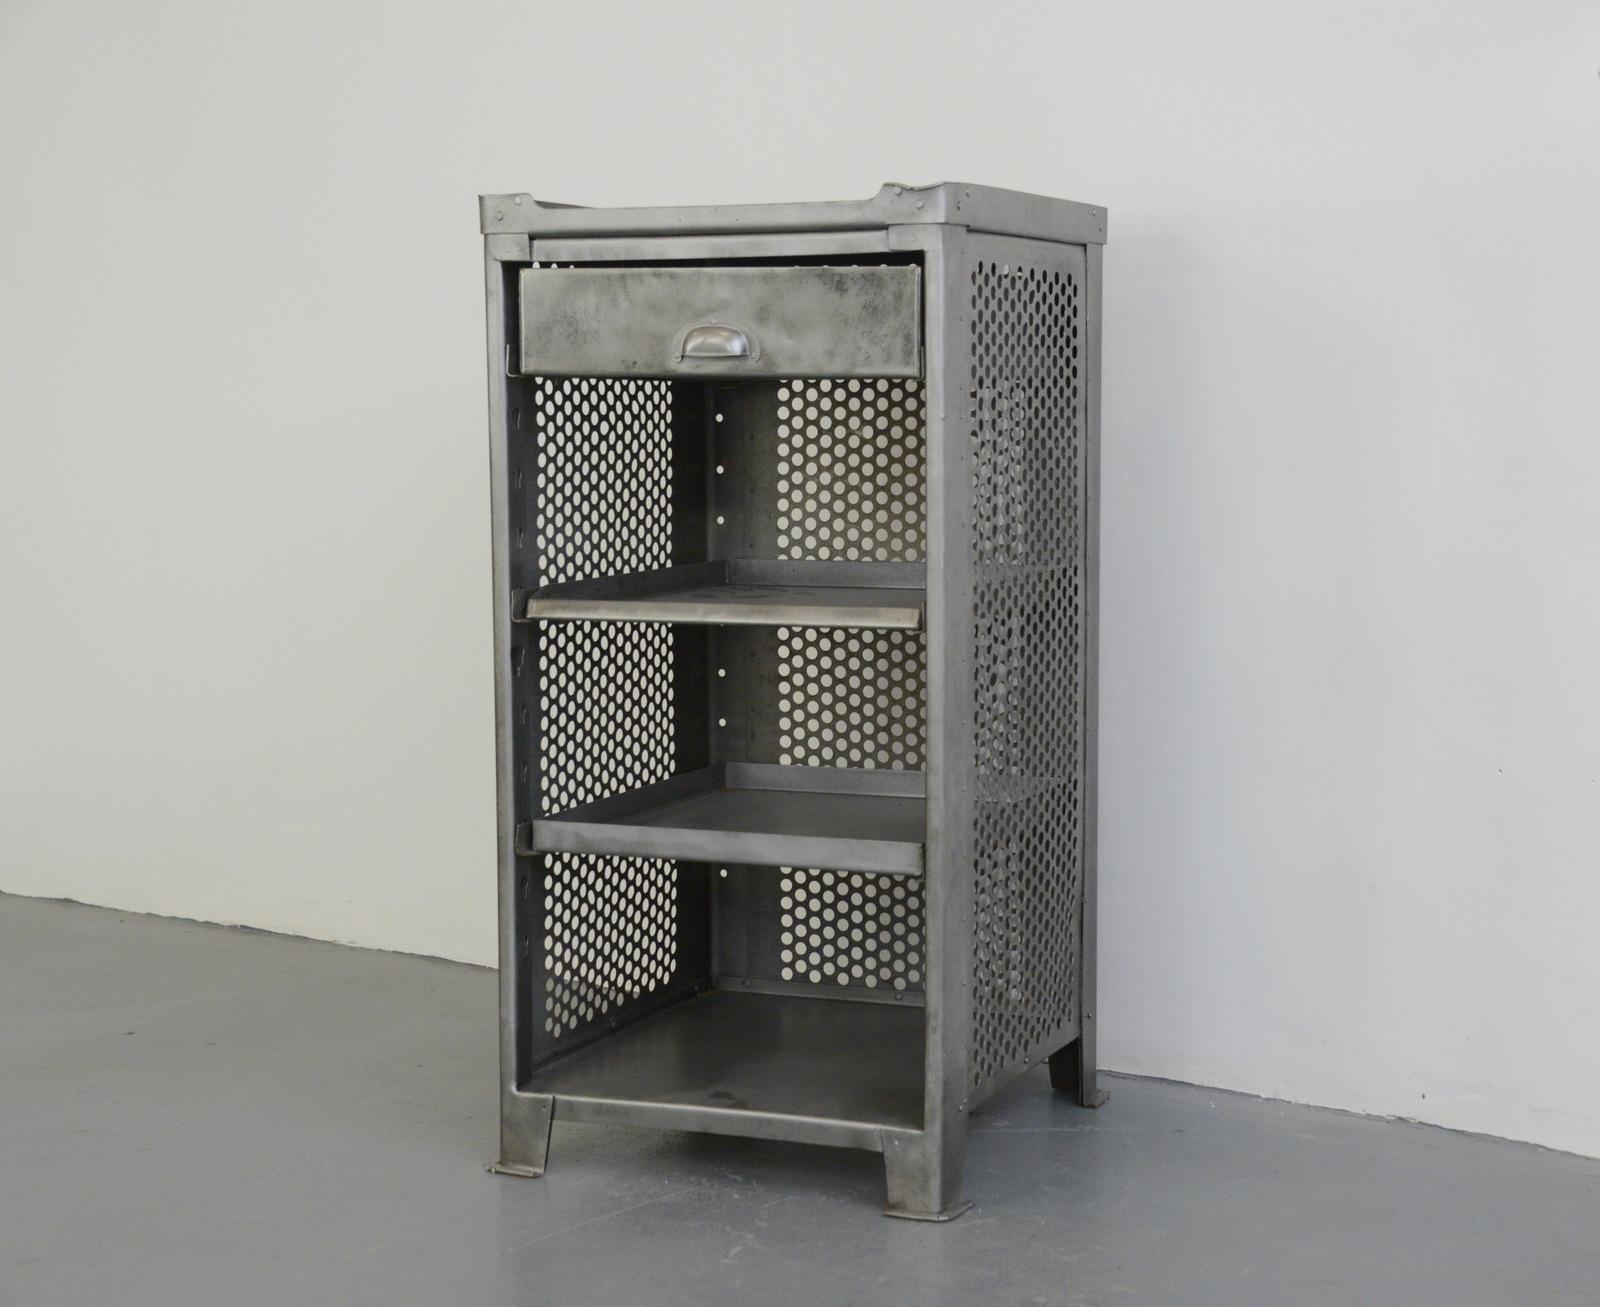 Industrial cabinet by Rowac, circa 1910

- 3 storage shelves and 1 drawer
- Original oak top
- Made from perforated sheet steel
- Designed by Robert Wagner
- Manufactured by Roawc, Chemnitz
- German ~ 1910
- 99cm tall x 50cm deep x 50cm